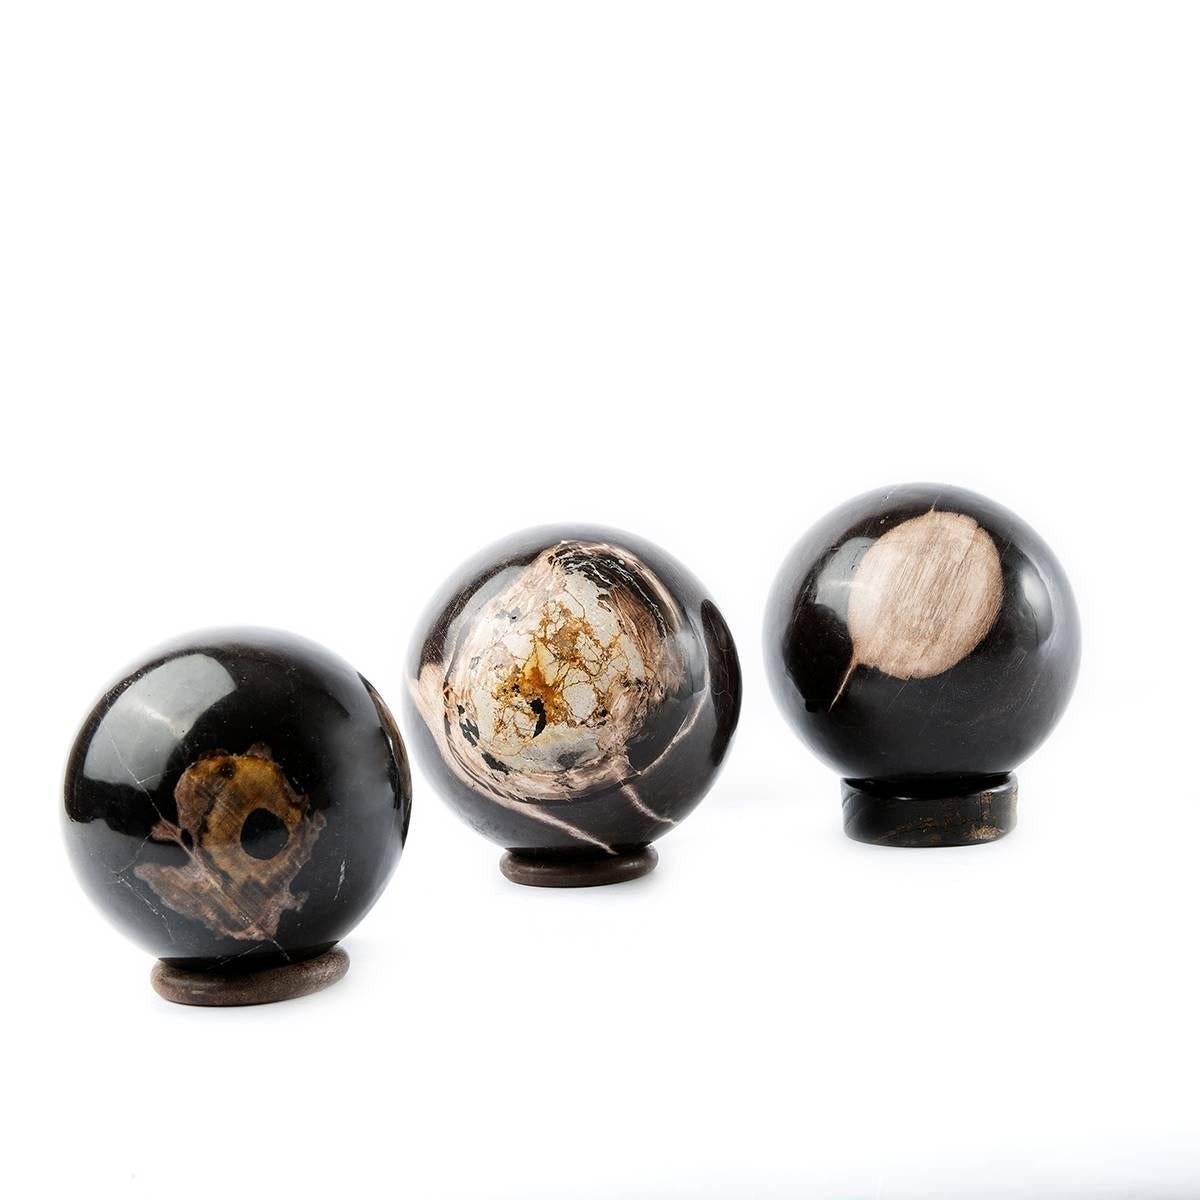 Millions of years old petrified wood - hand-collected from the jungle of Sumatra, Indonesia and carefully polished to create these beautiful granite-like balls. A set can be a great decorative idea for your safari-inspired living room. It also fits